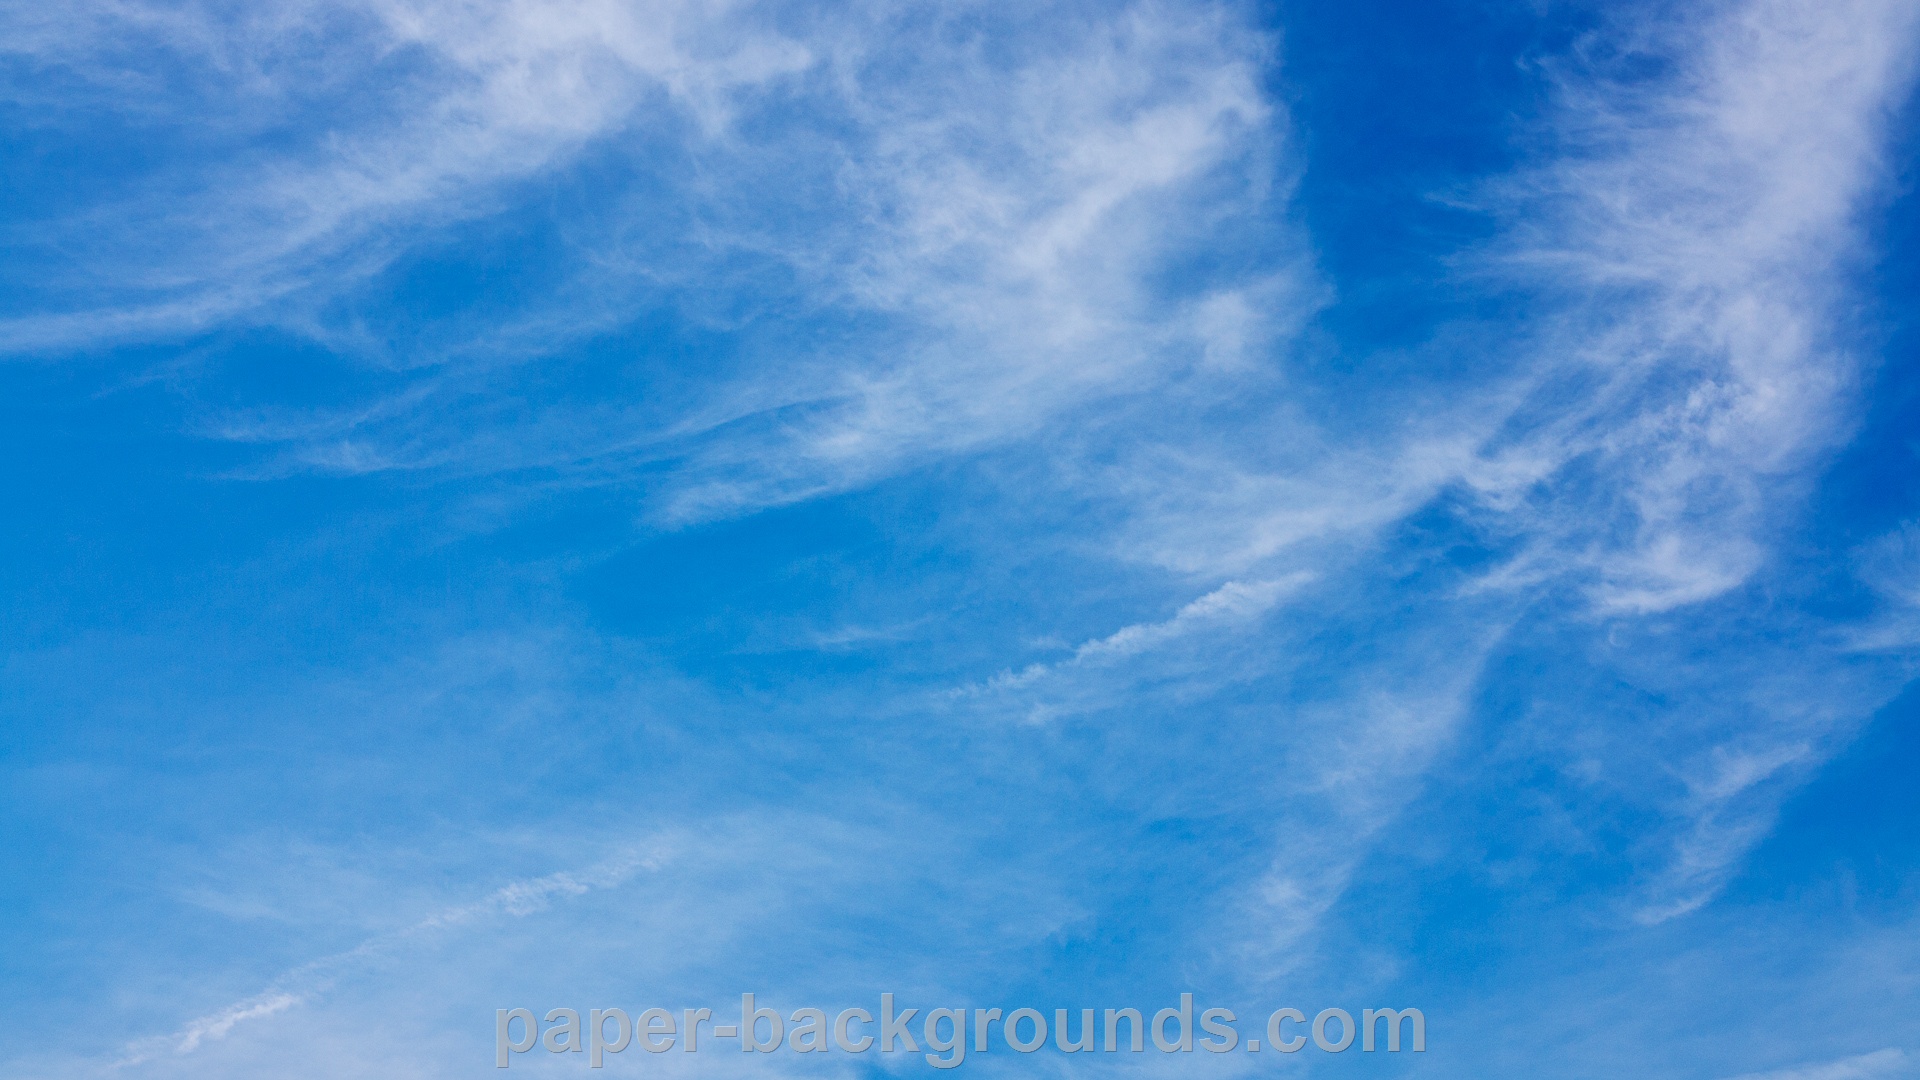 blue sky background hd Paper Backgrounds 1920x1080